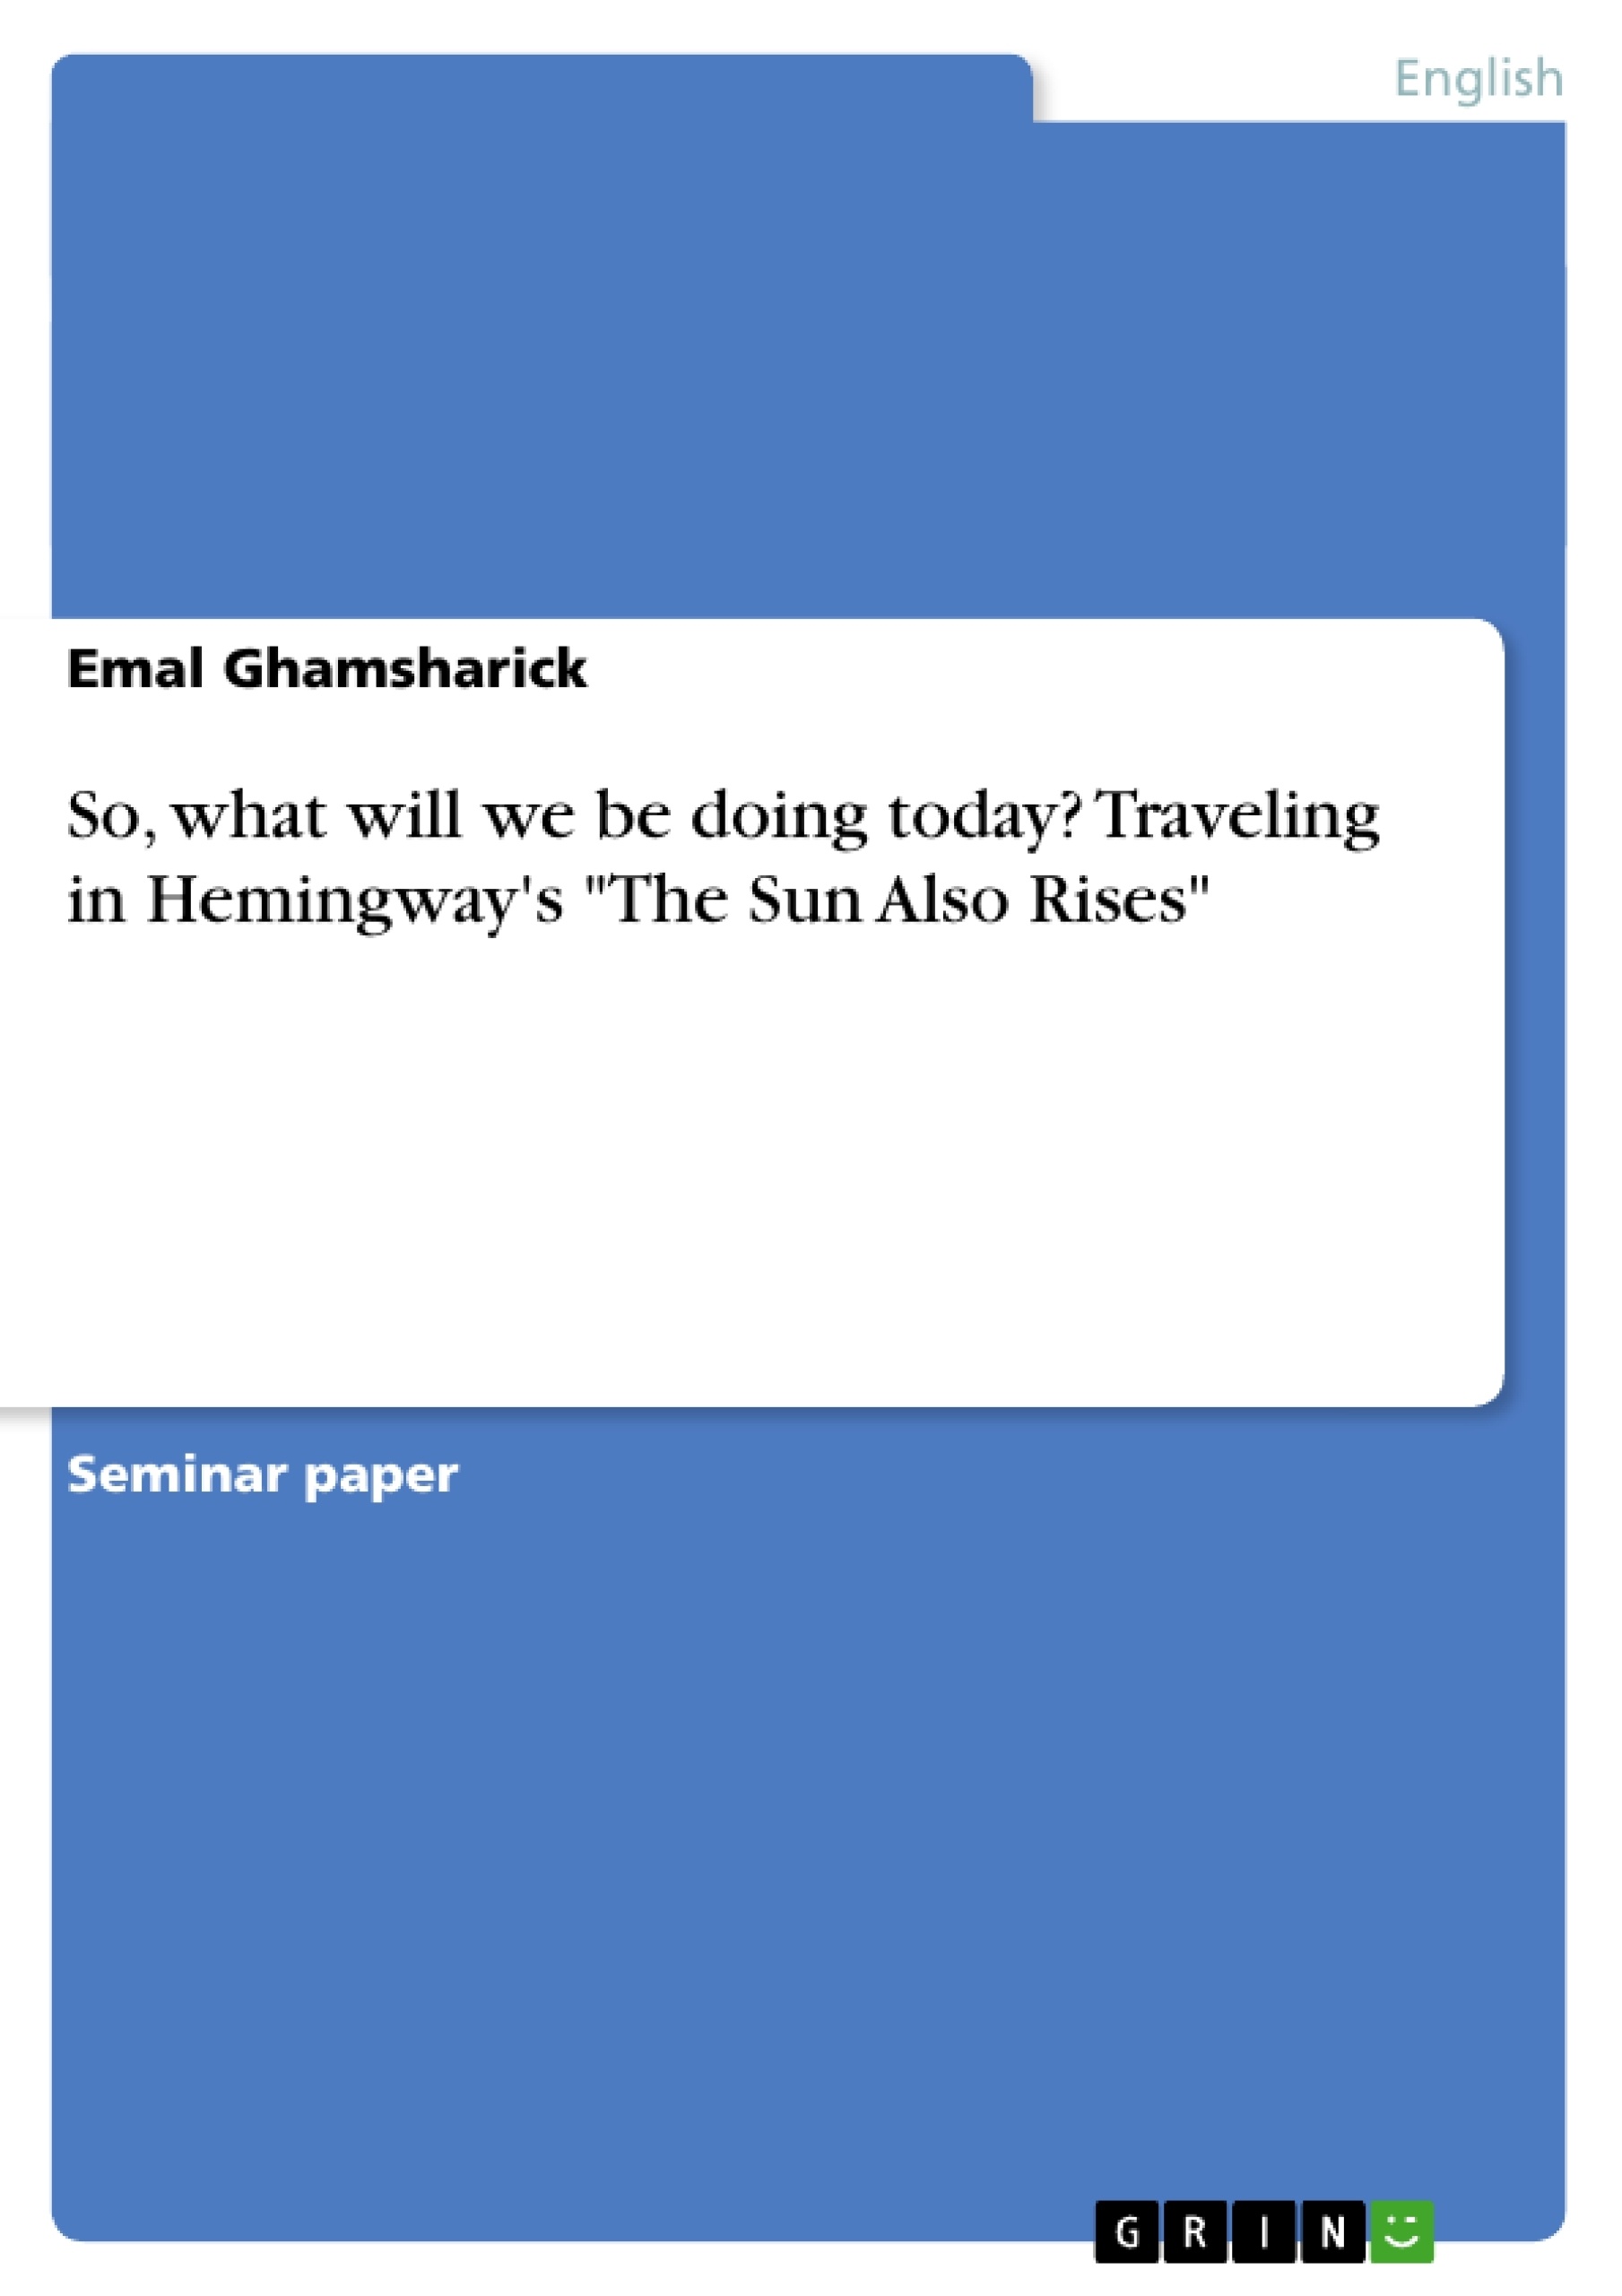 Title: So, what will we be doing today? Traveling in Hemingway's "The Sun Also Rises"